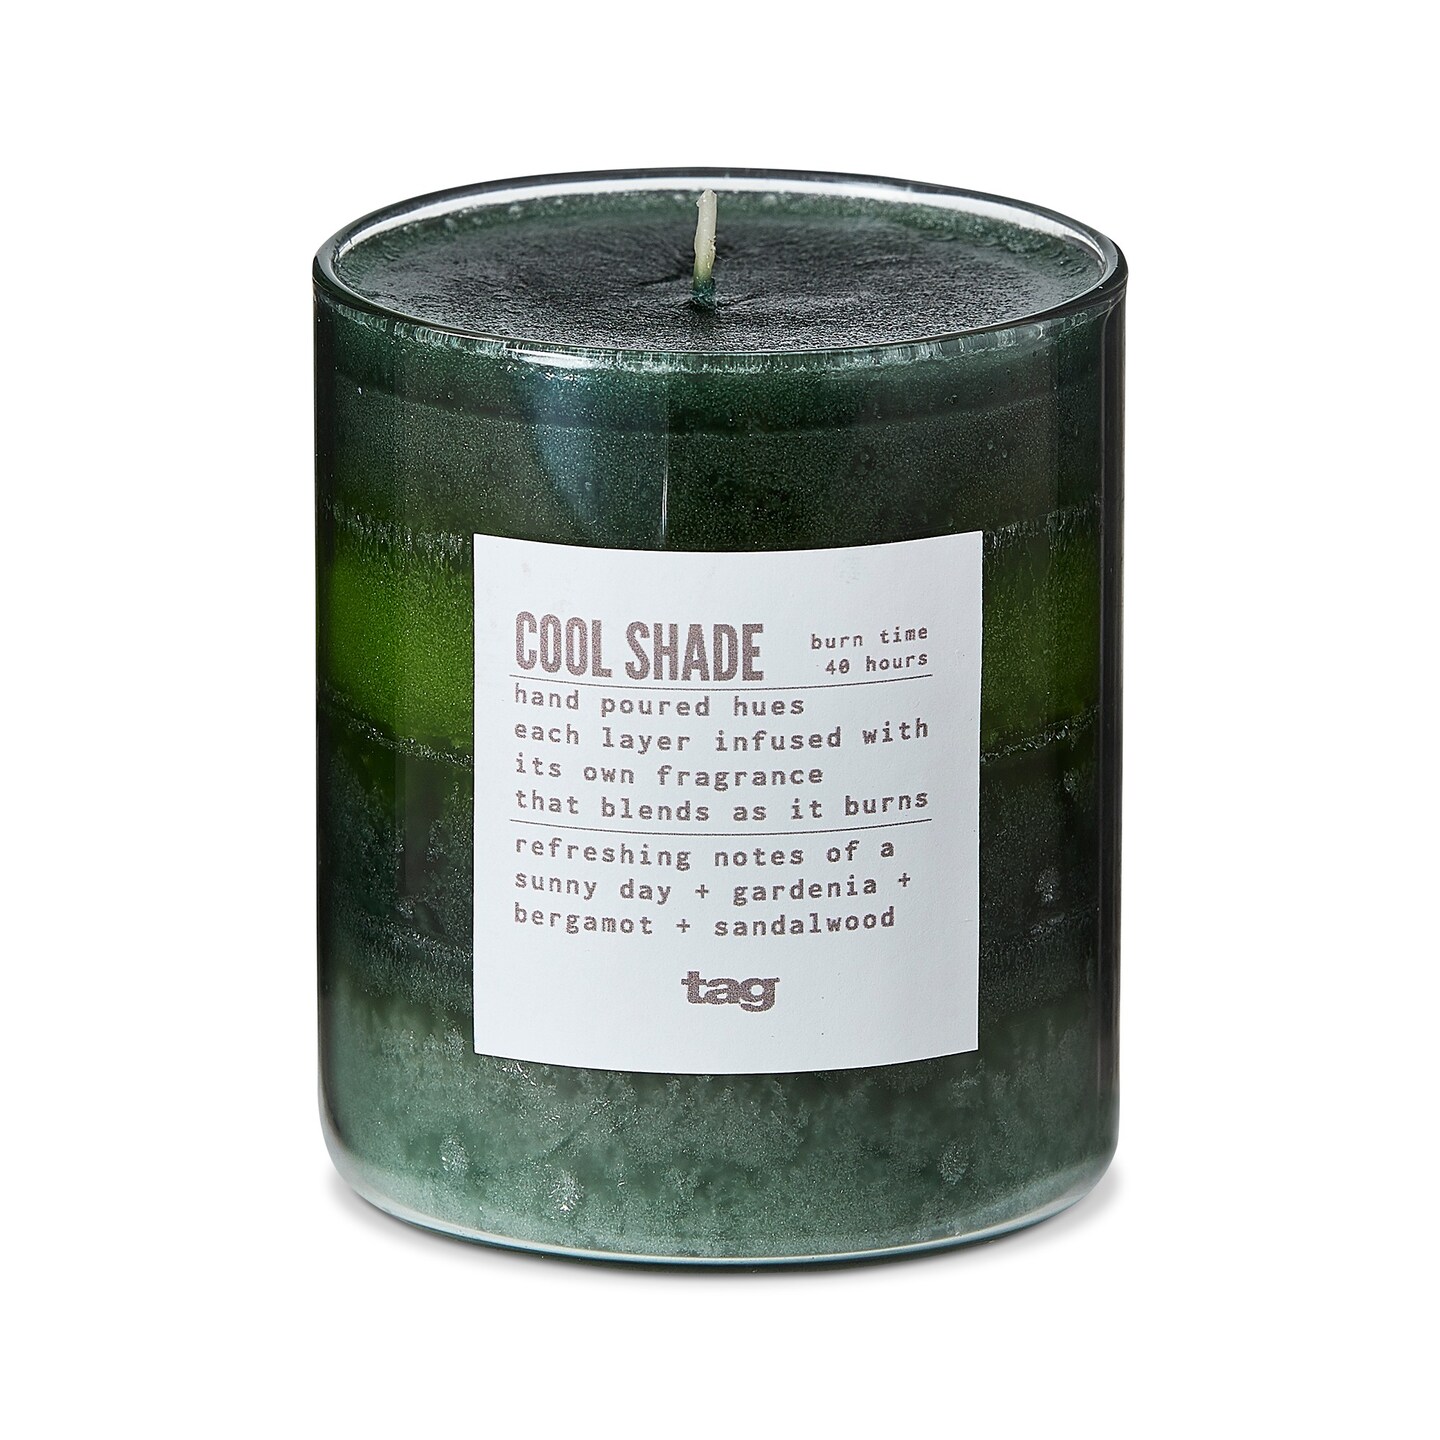 Cool Shade Themed Scented Paraffin Wax Pillar Candle Small, Green, 3x3.3 inch, Burn Time 55 Hours